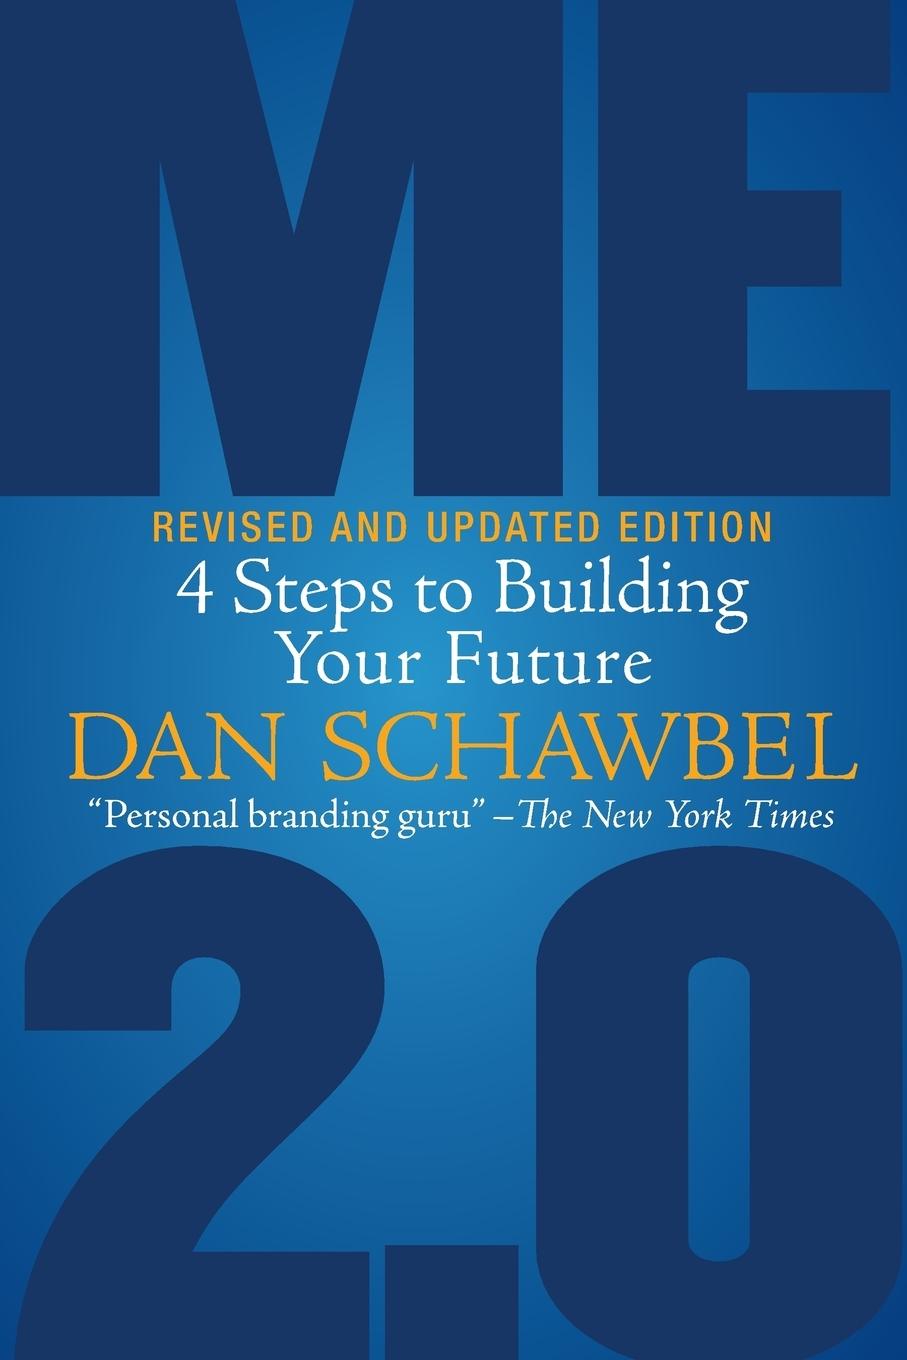 Book Me 2.0, Revised and Updated Edition Dan Schawbel